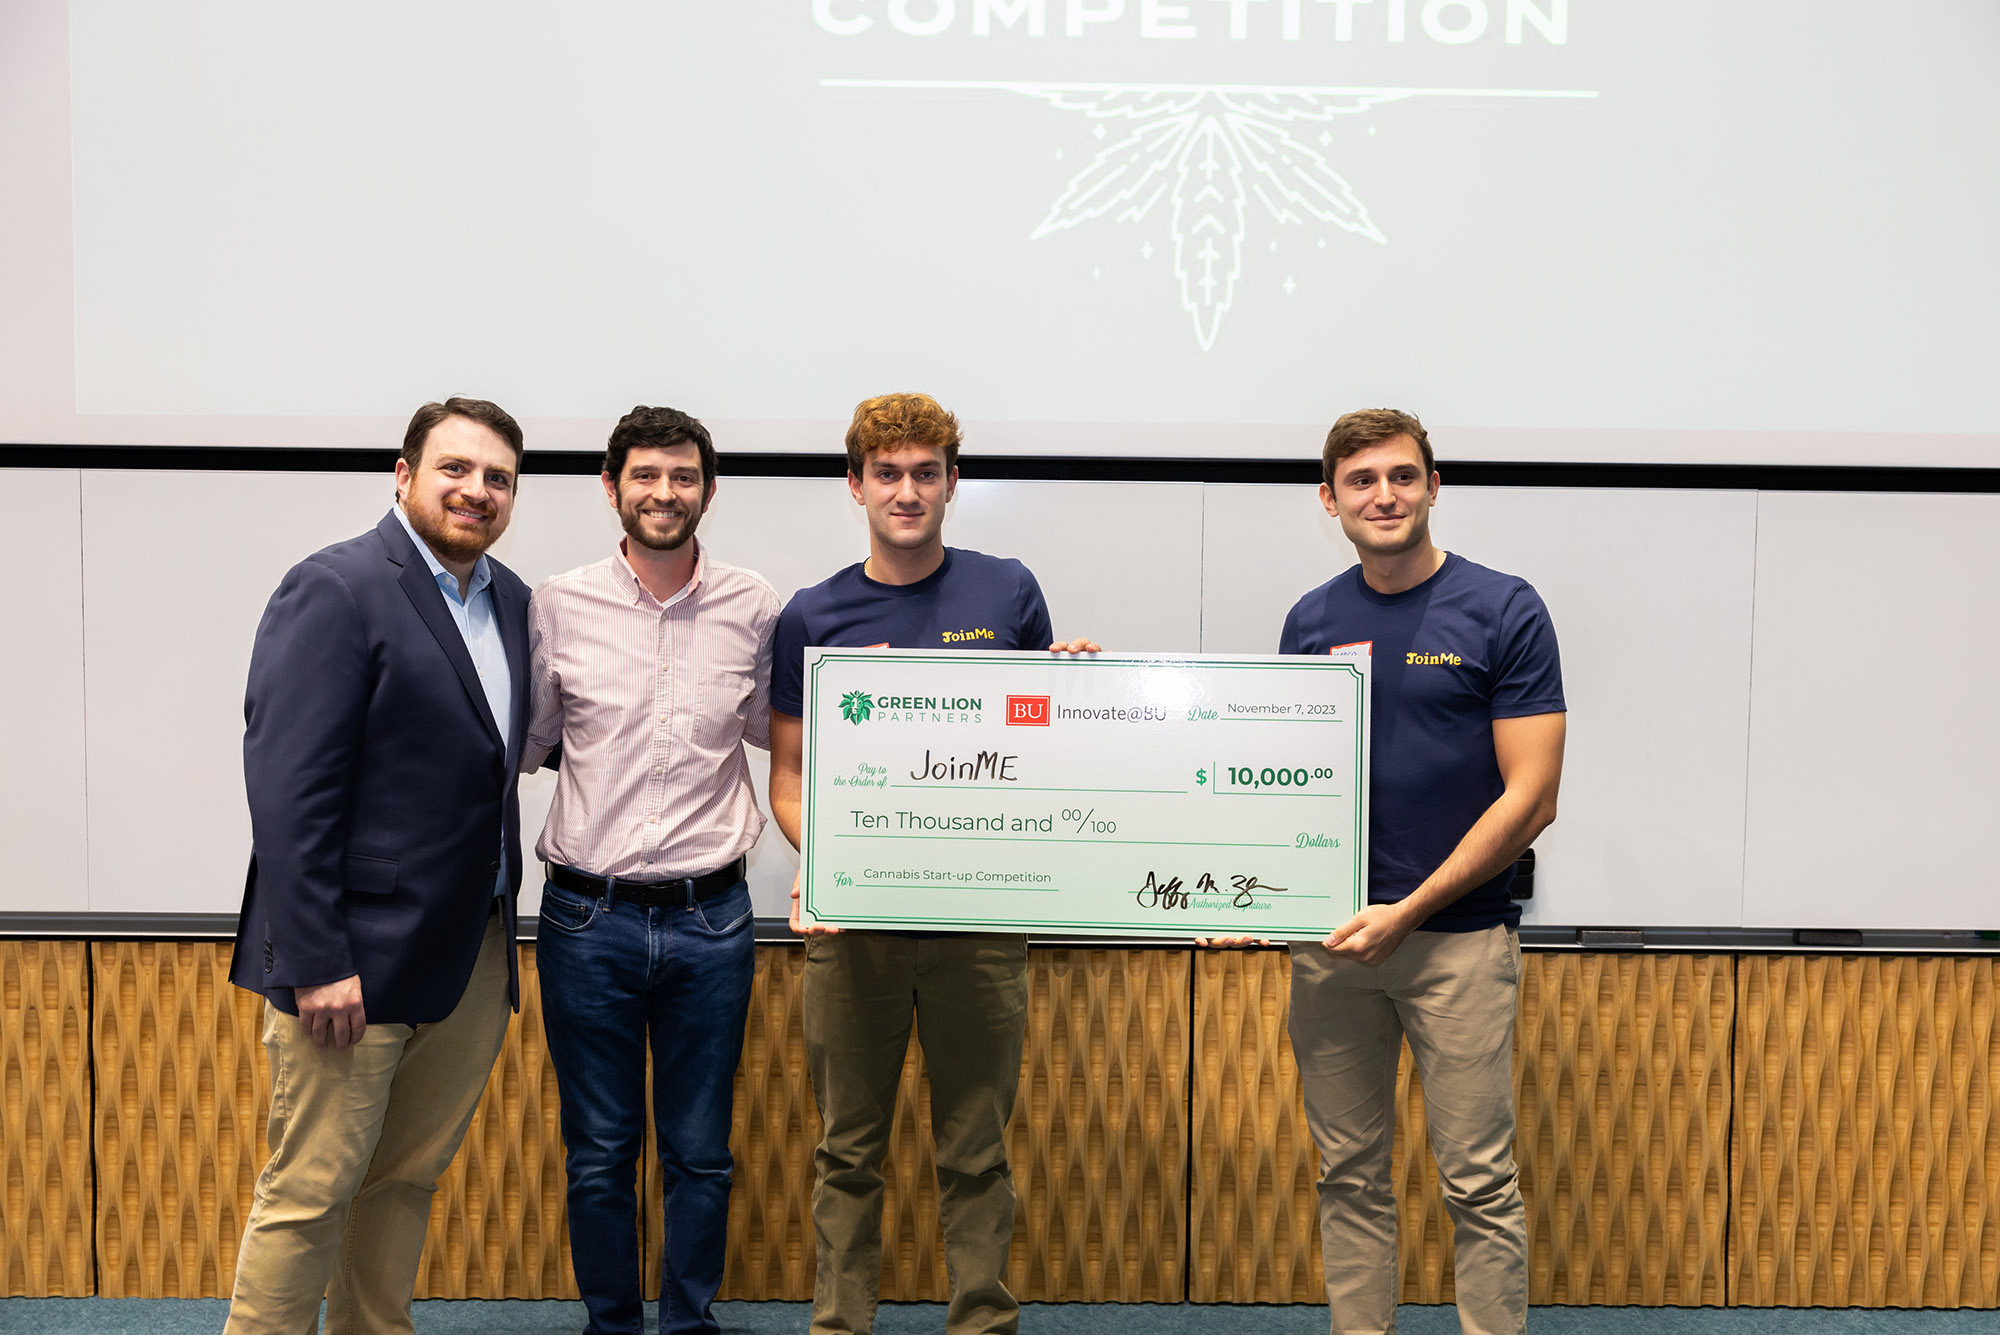 Student entrepreneurial team out HUSTLEs competition to win food